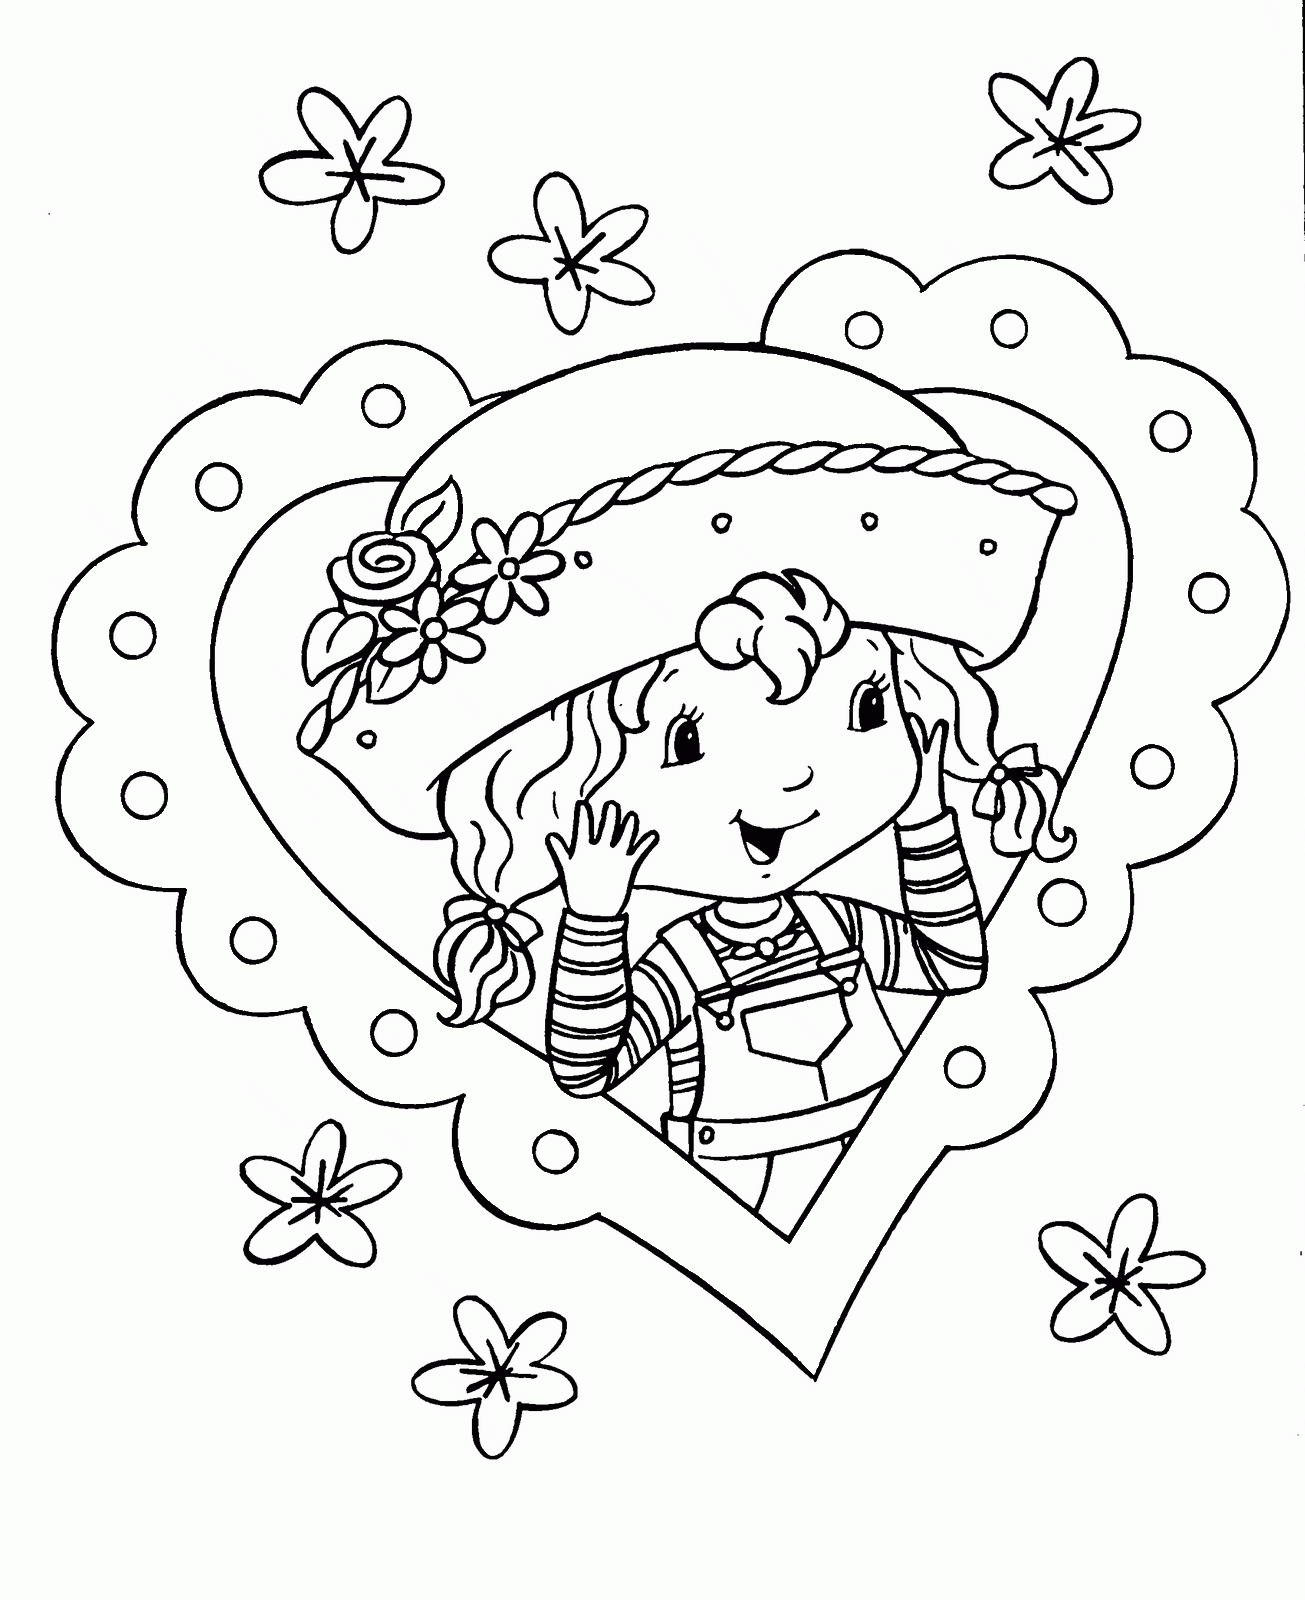 Strawberry Shortcake Coloring Pages TV Film Printable 2020 08131 Coloring4free